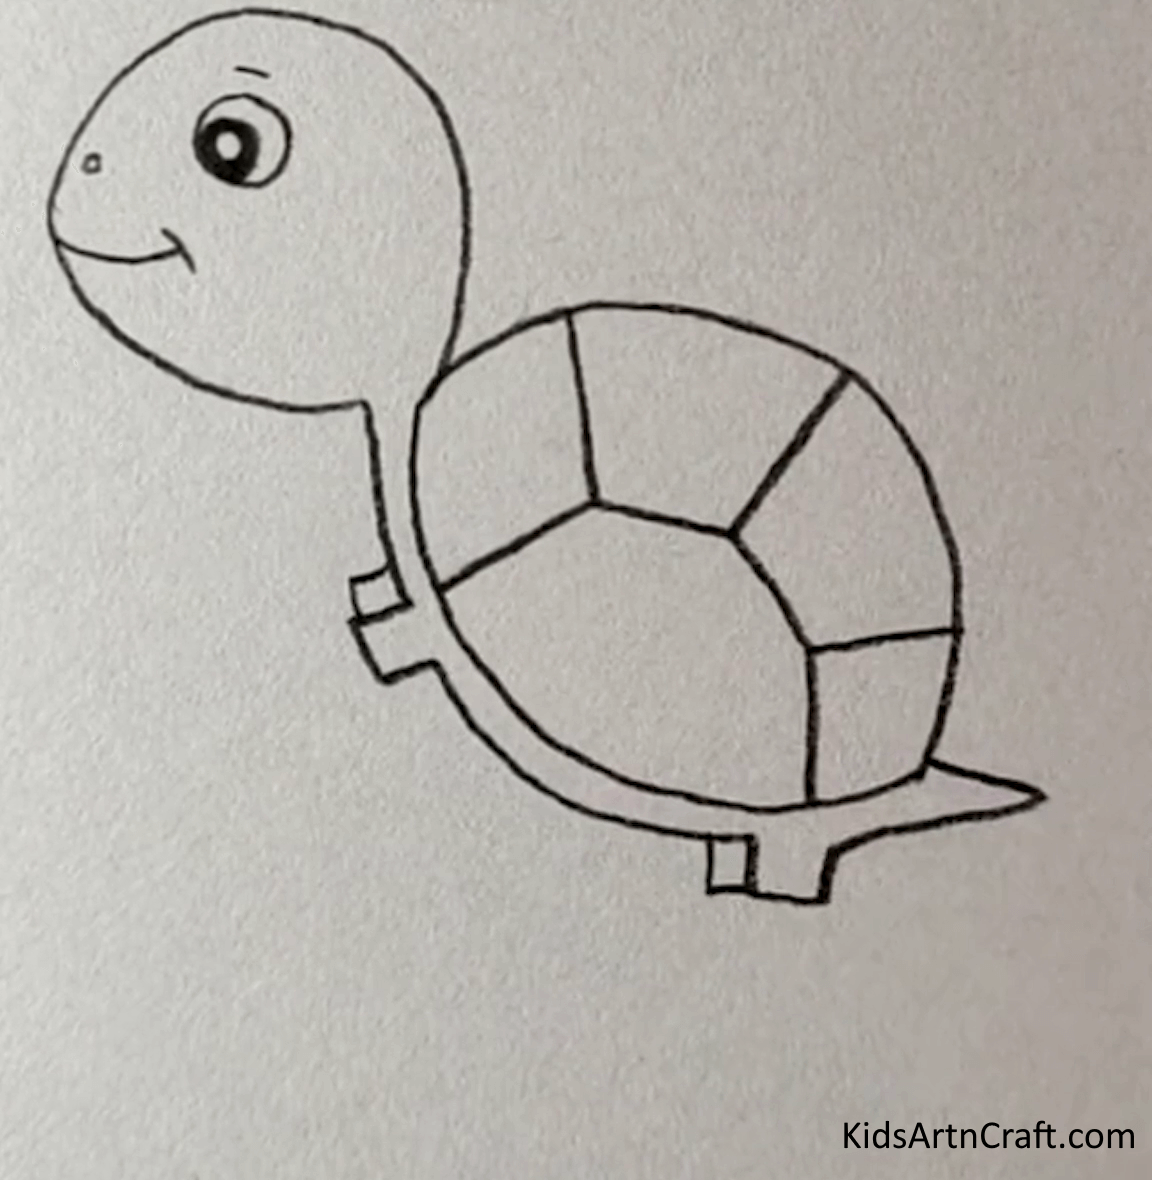 Little Turtle Drawing For Kids - Drawing animals with a pencil - an idea for kids